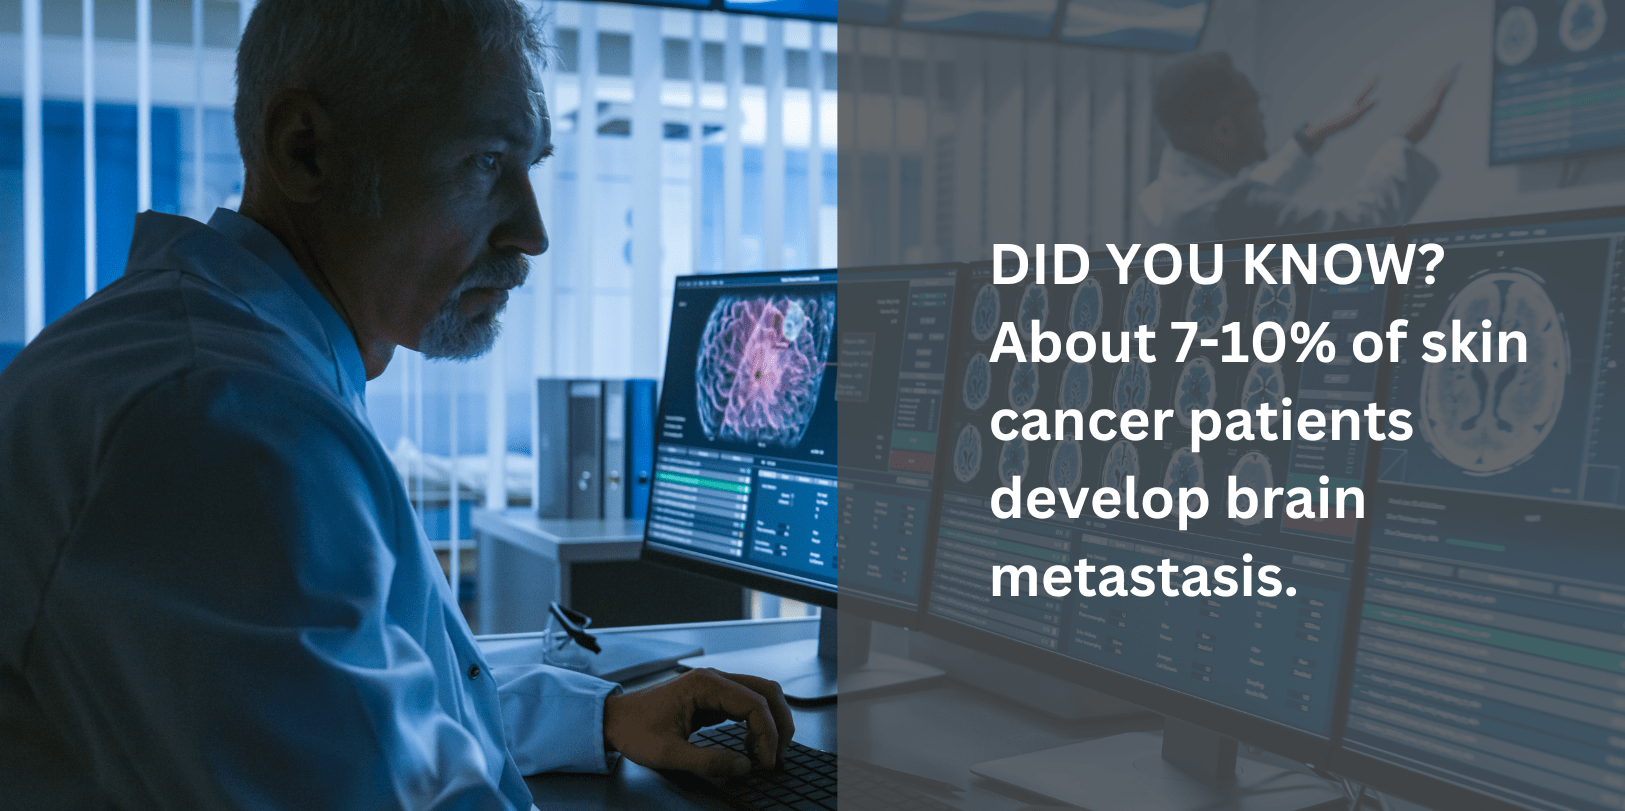 Did you know? About 7-10% of skin cancer patients develop brain metastasis. Image: Doctor looking at MRI results